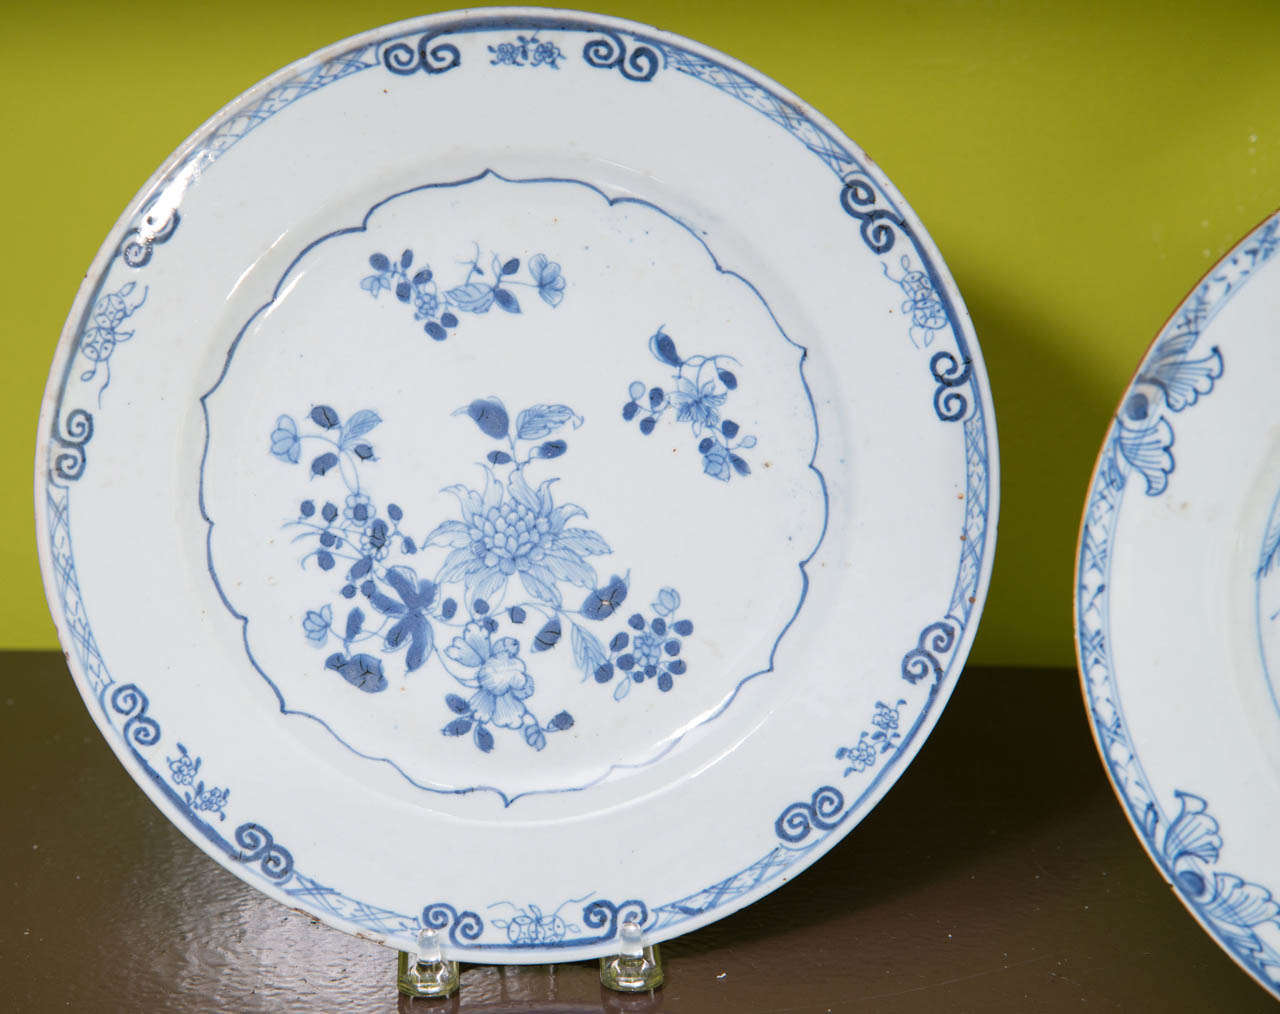 Chinese Export Porcelain Plates 5